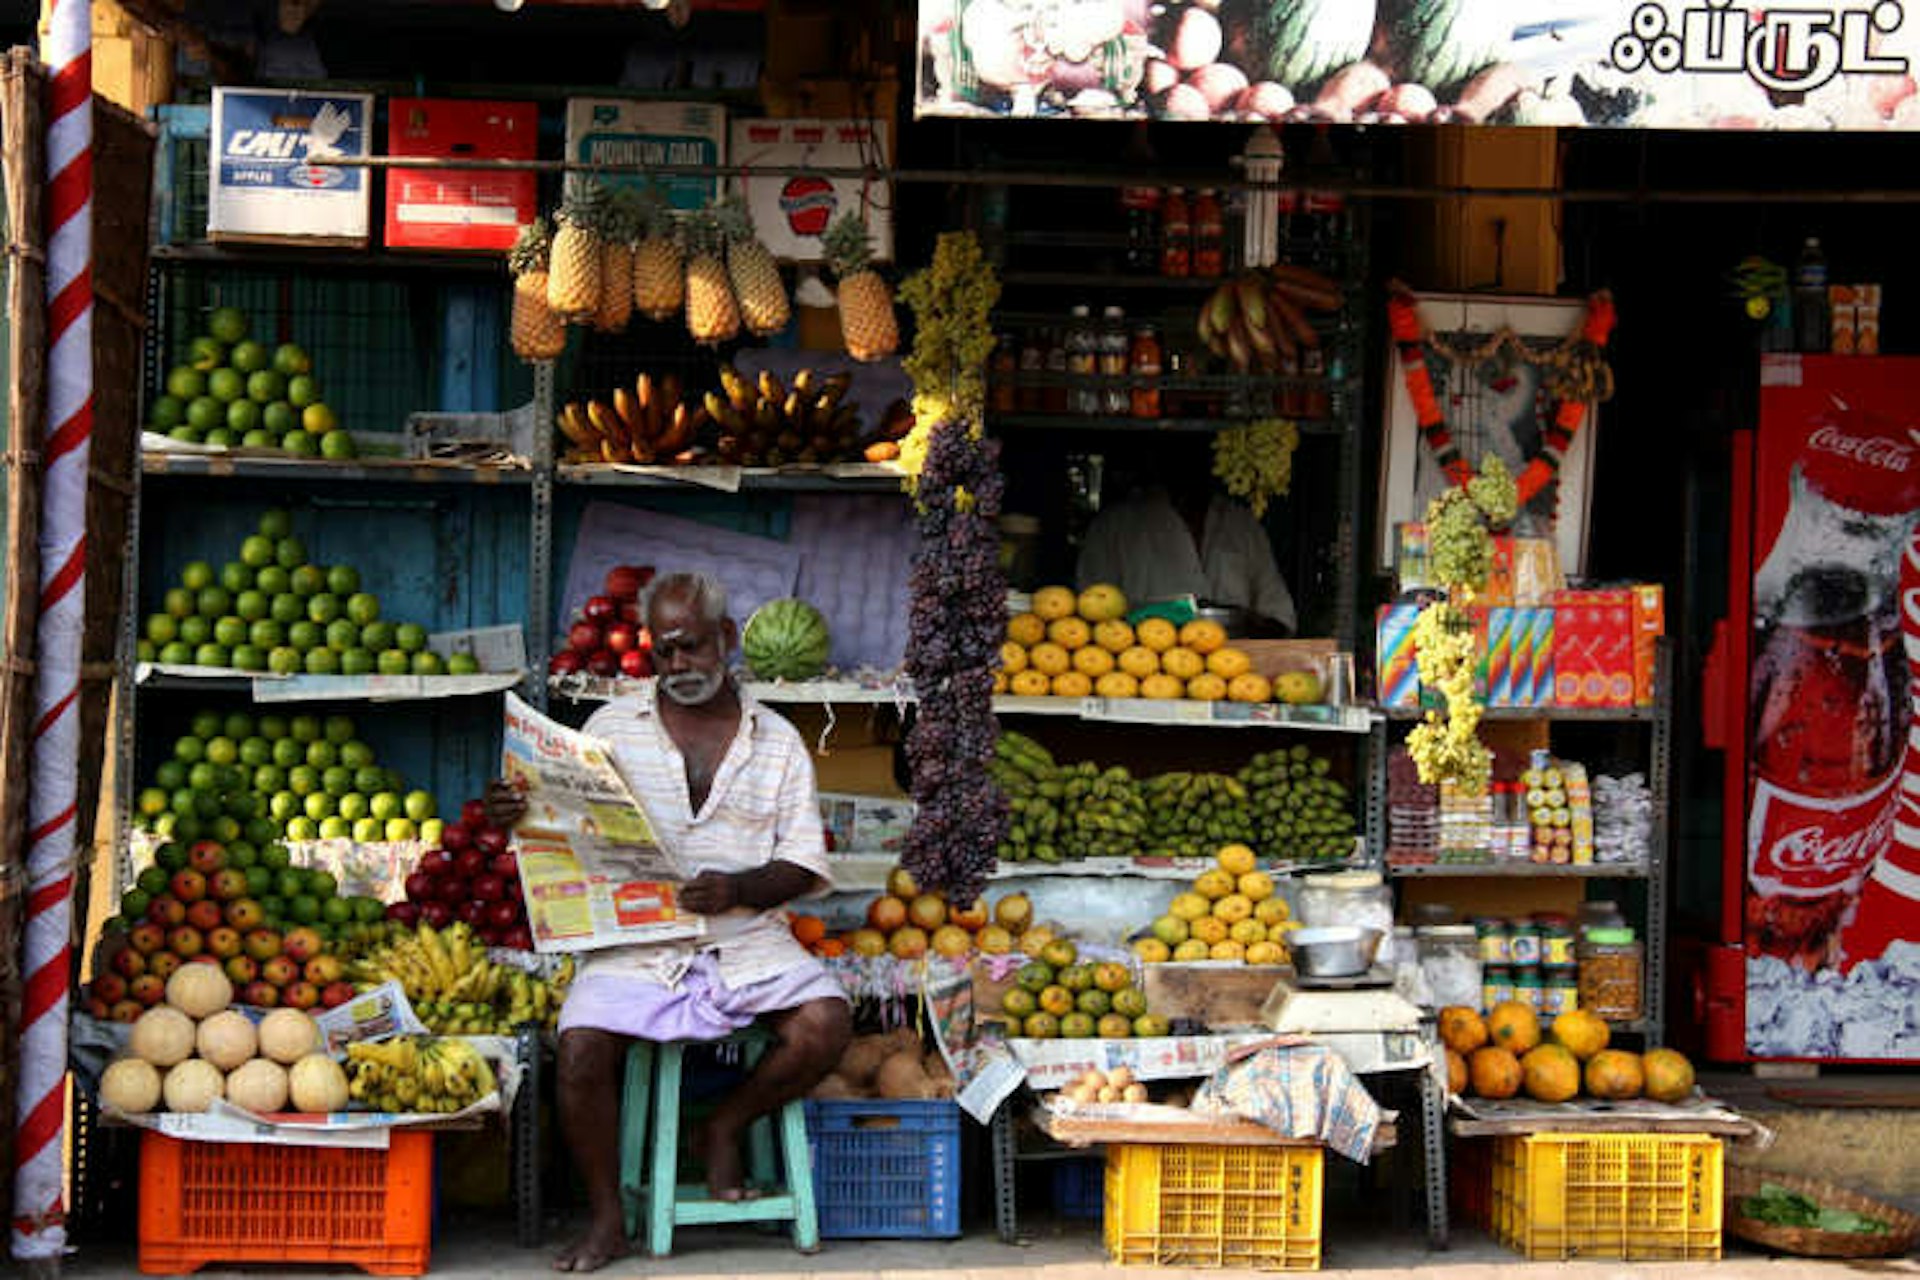 Fruit stall in Mylapore, Chennai. Image by Sudhamshu Hebbar / CC BY 2.0.